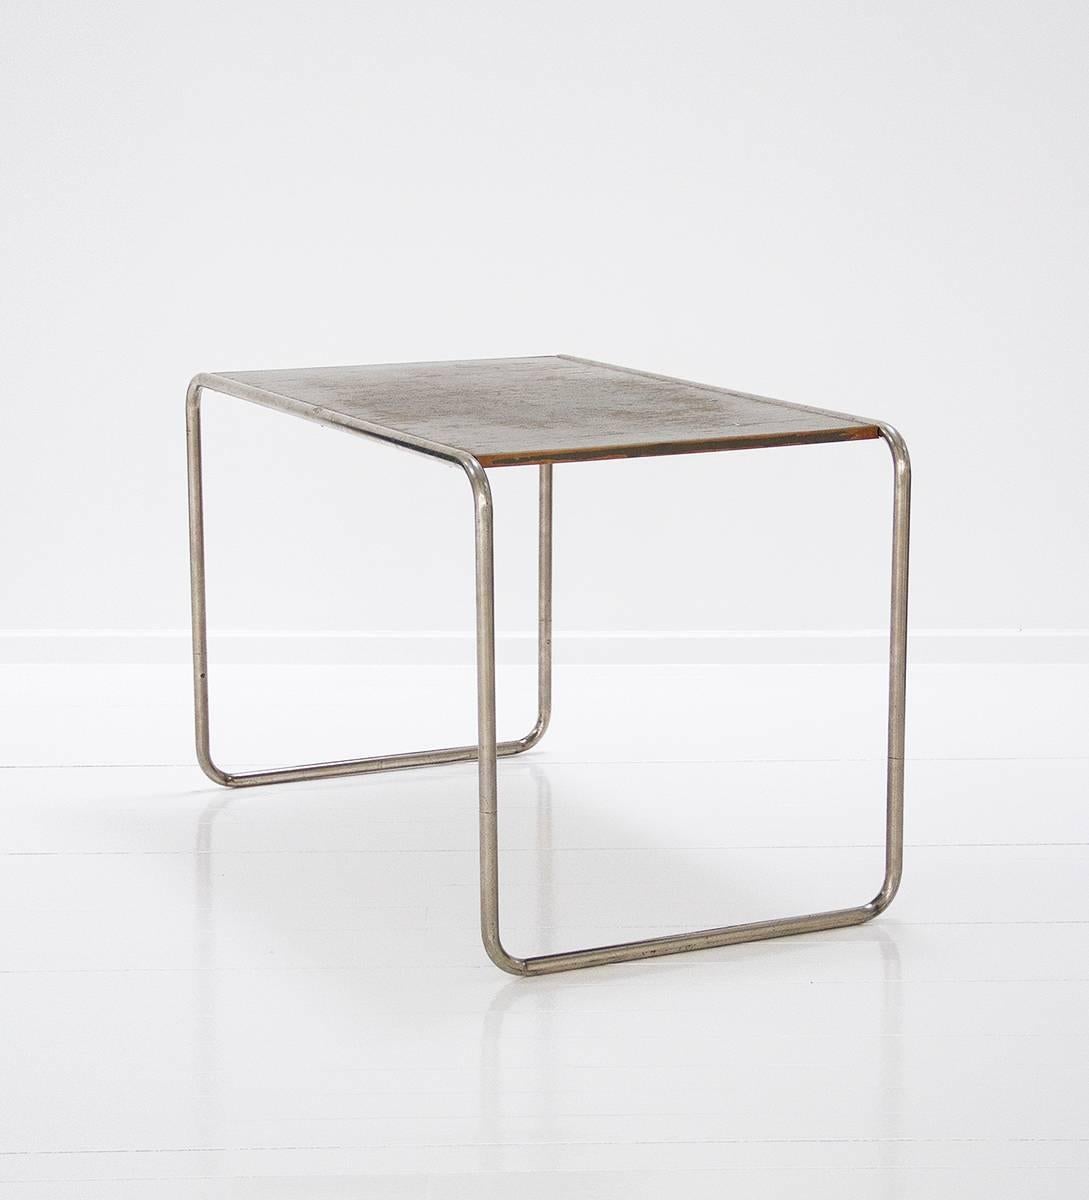 Mid-20th Century Table Designed by Marcel Breuer, Chromed Tubular Steel Lacquered Wood, 1930s For Sale